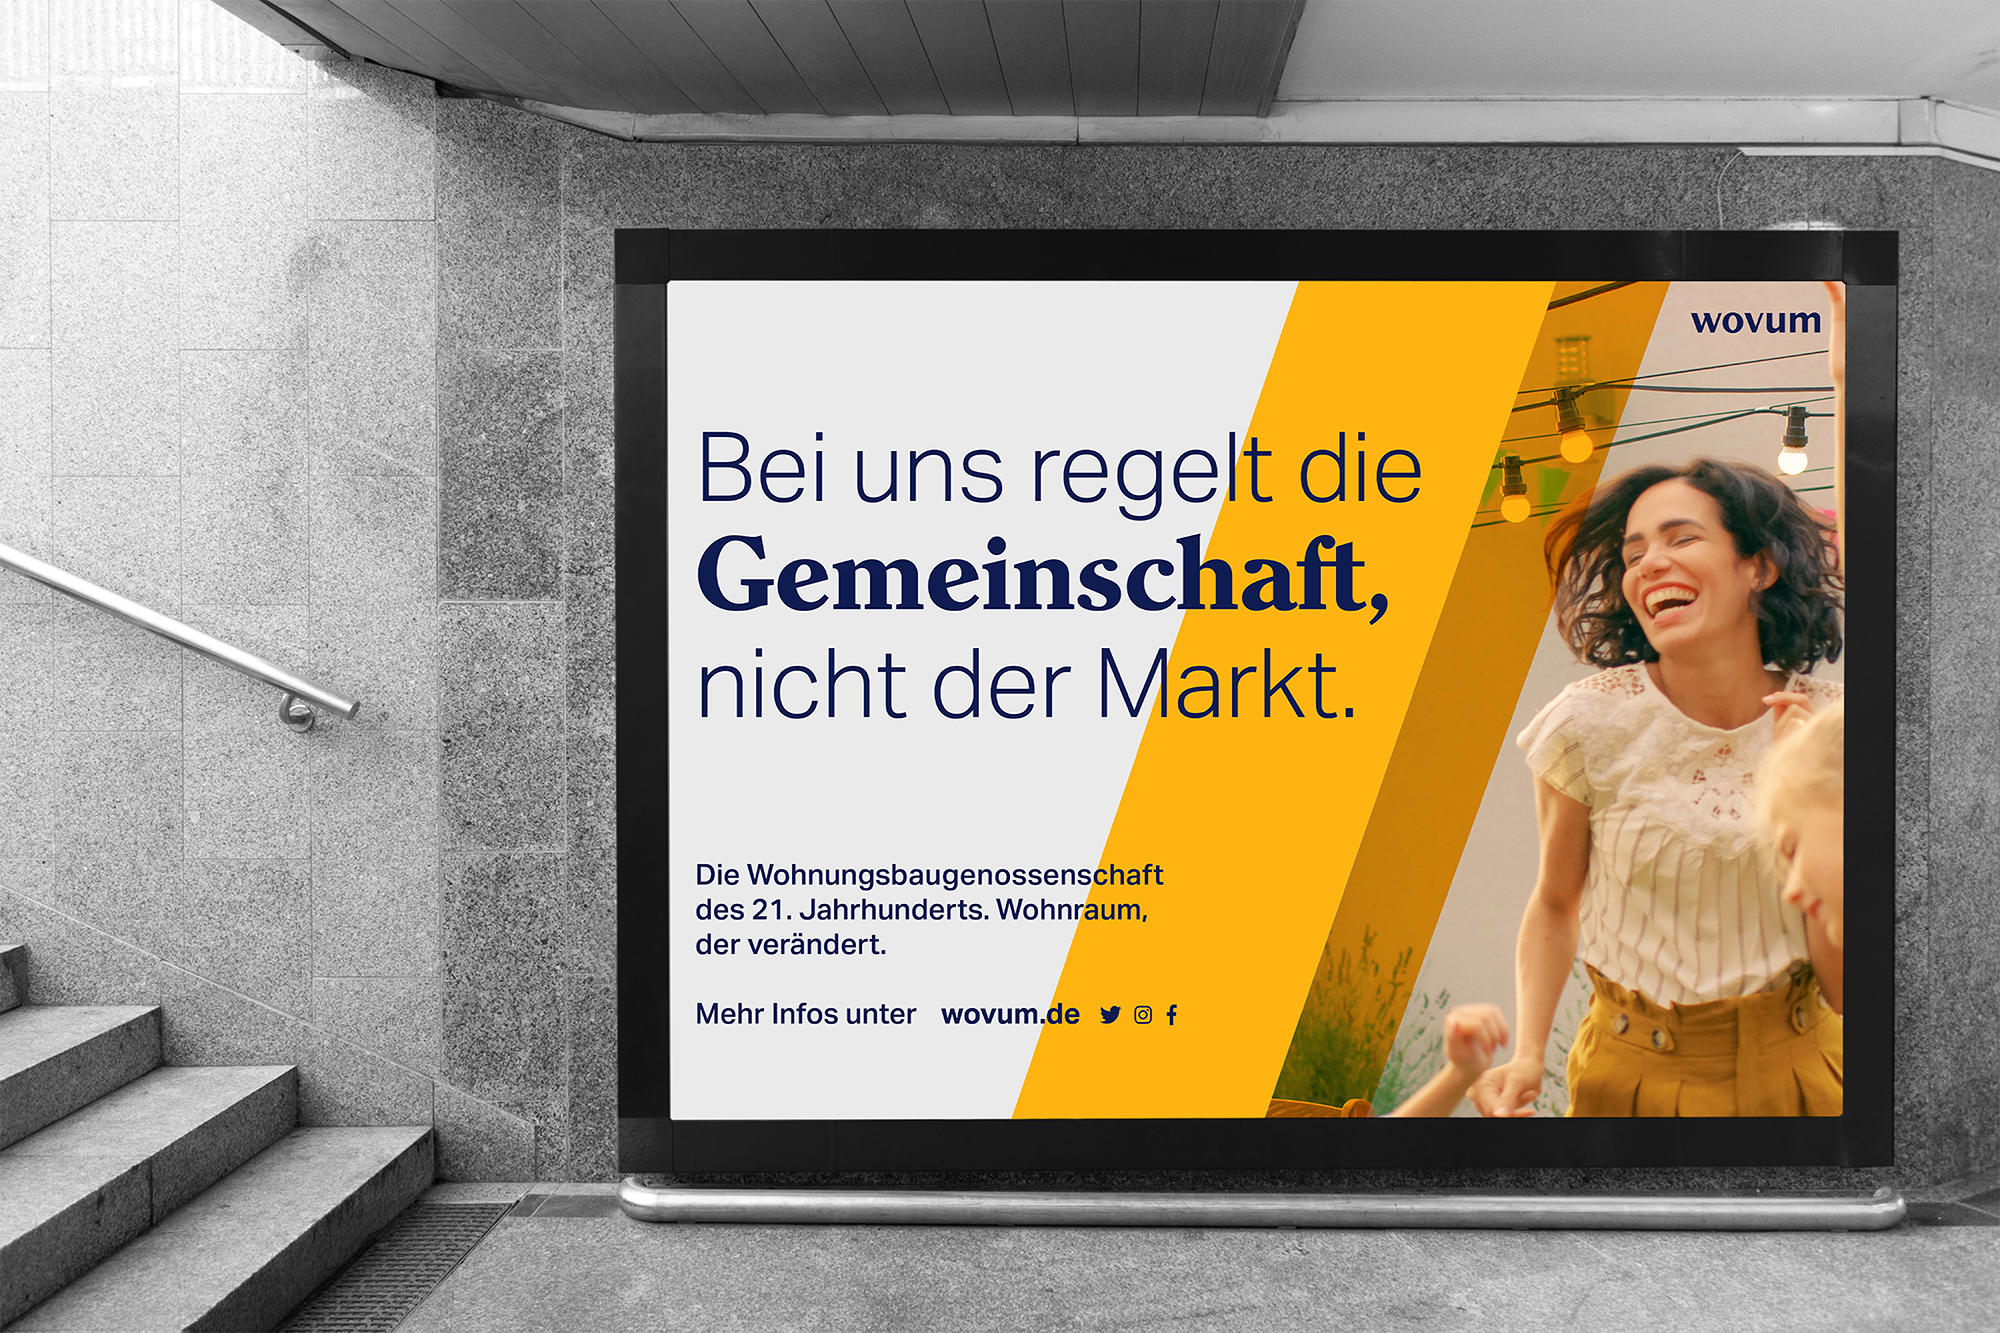 The image shows a photograph of a wovum billboard in a subway station entrance.